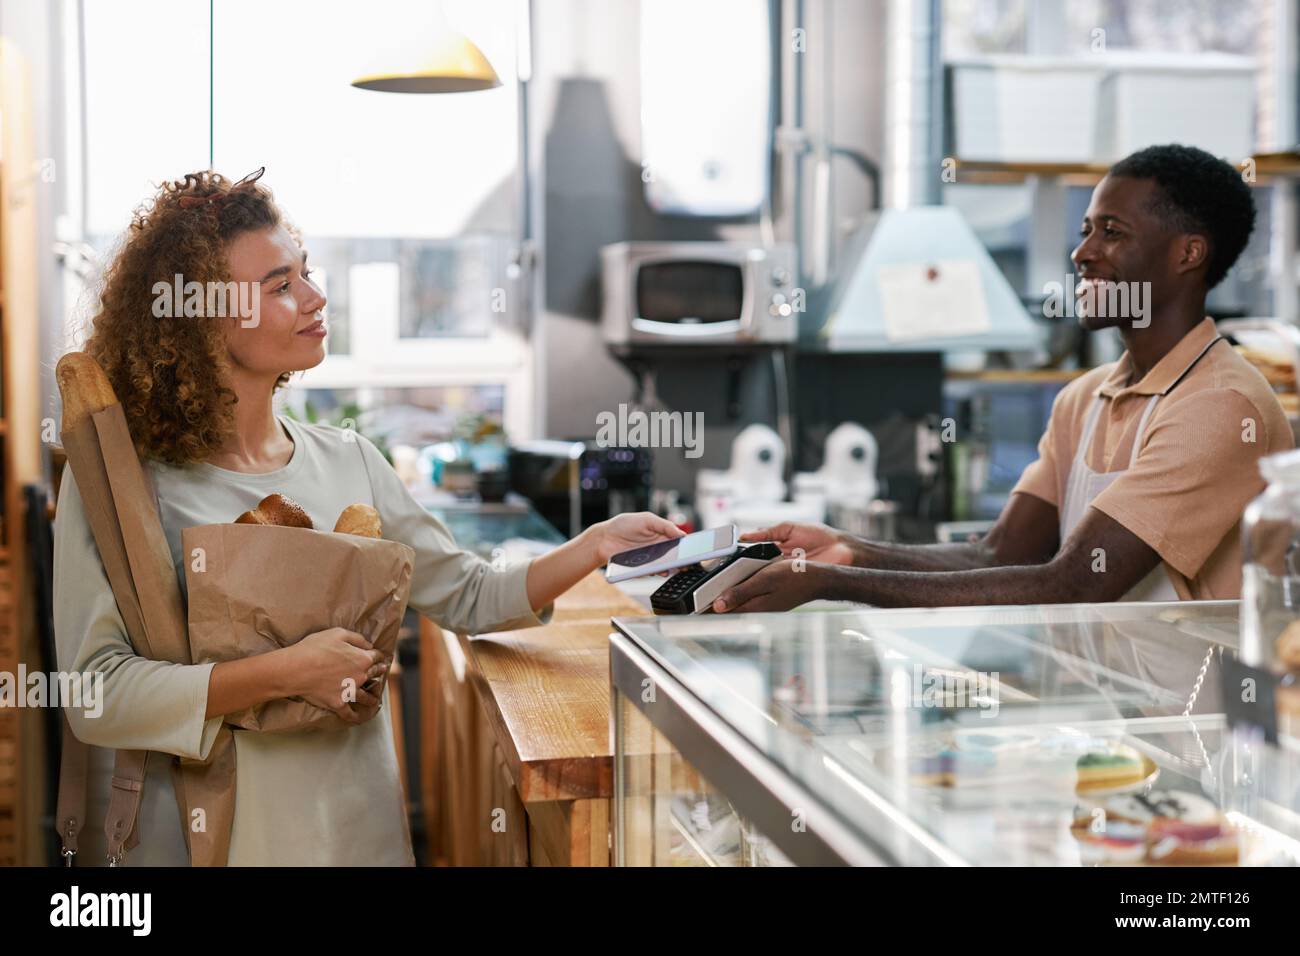 Happy woman using contactless payment app when paying for bread in local bakery Stock Photo